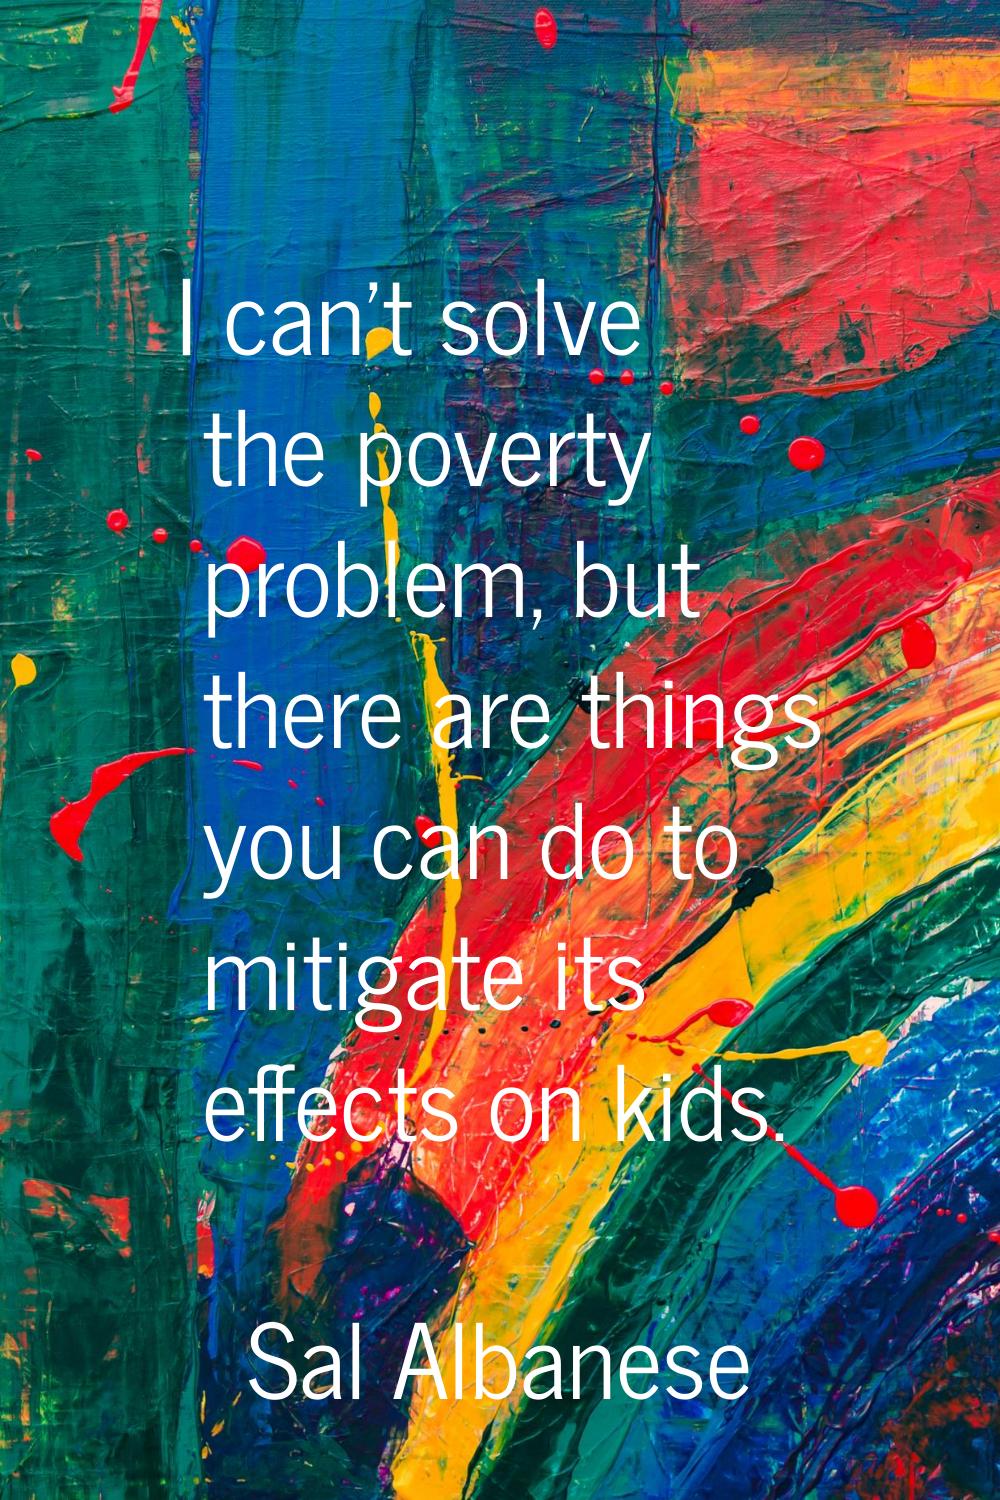 I can't solve the poverty problem, but there are things you can do to mitigate its effects on kids.